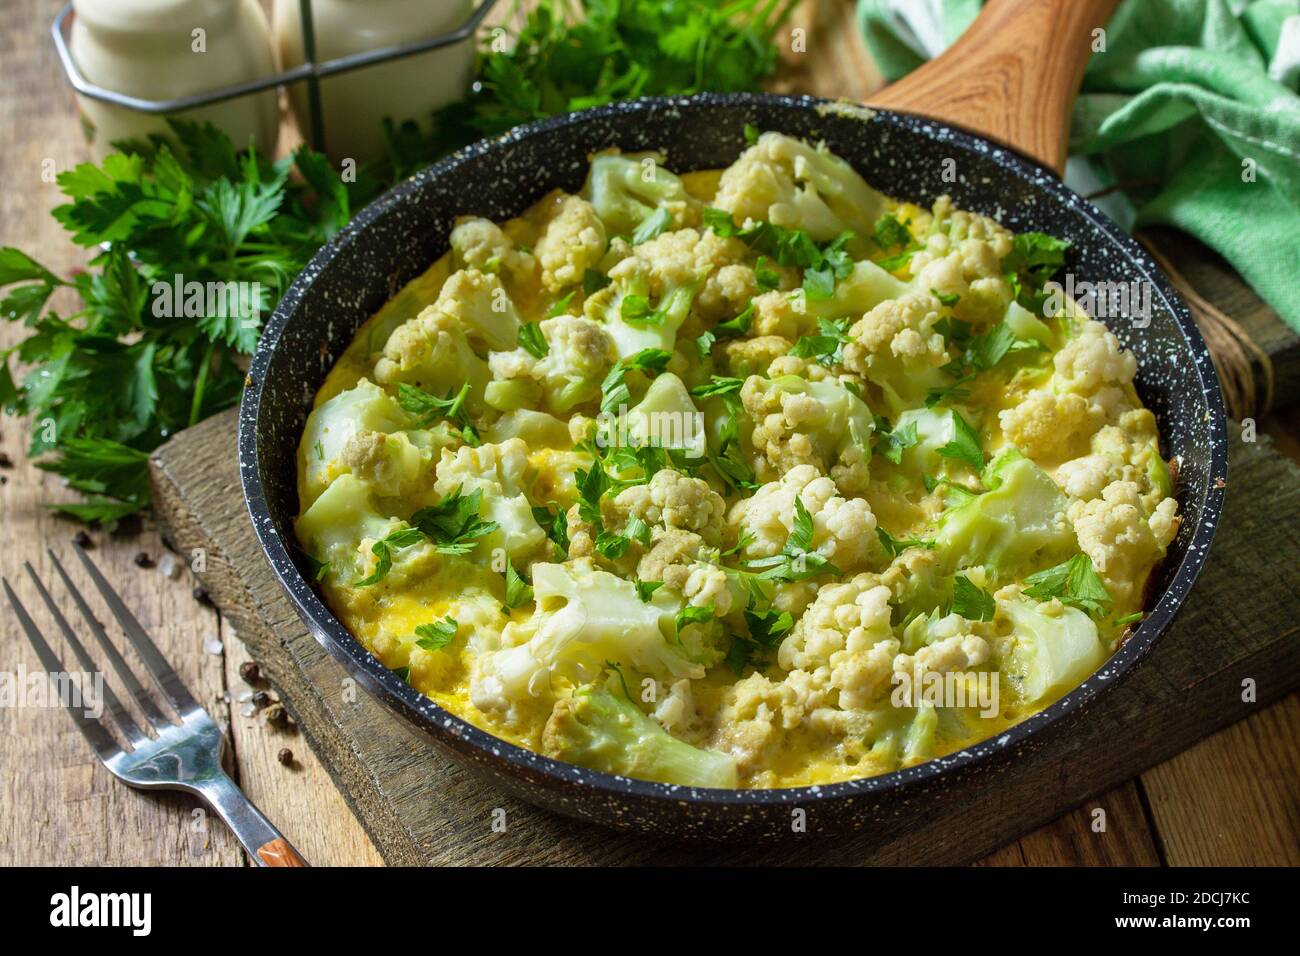 Diet breakfast or healthy lunch. Egg omelet with cauliflower in a cast-iron pan on rustic wooden table. Stock Photo